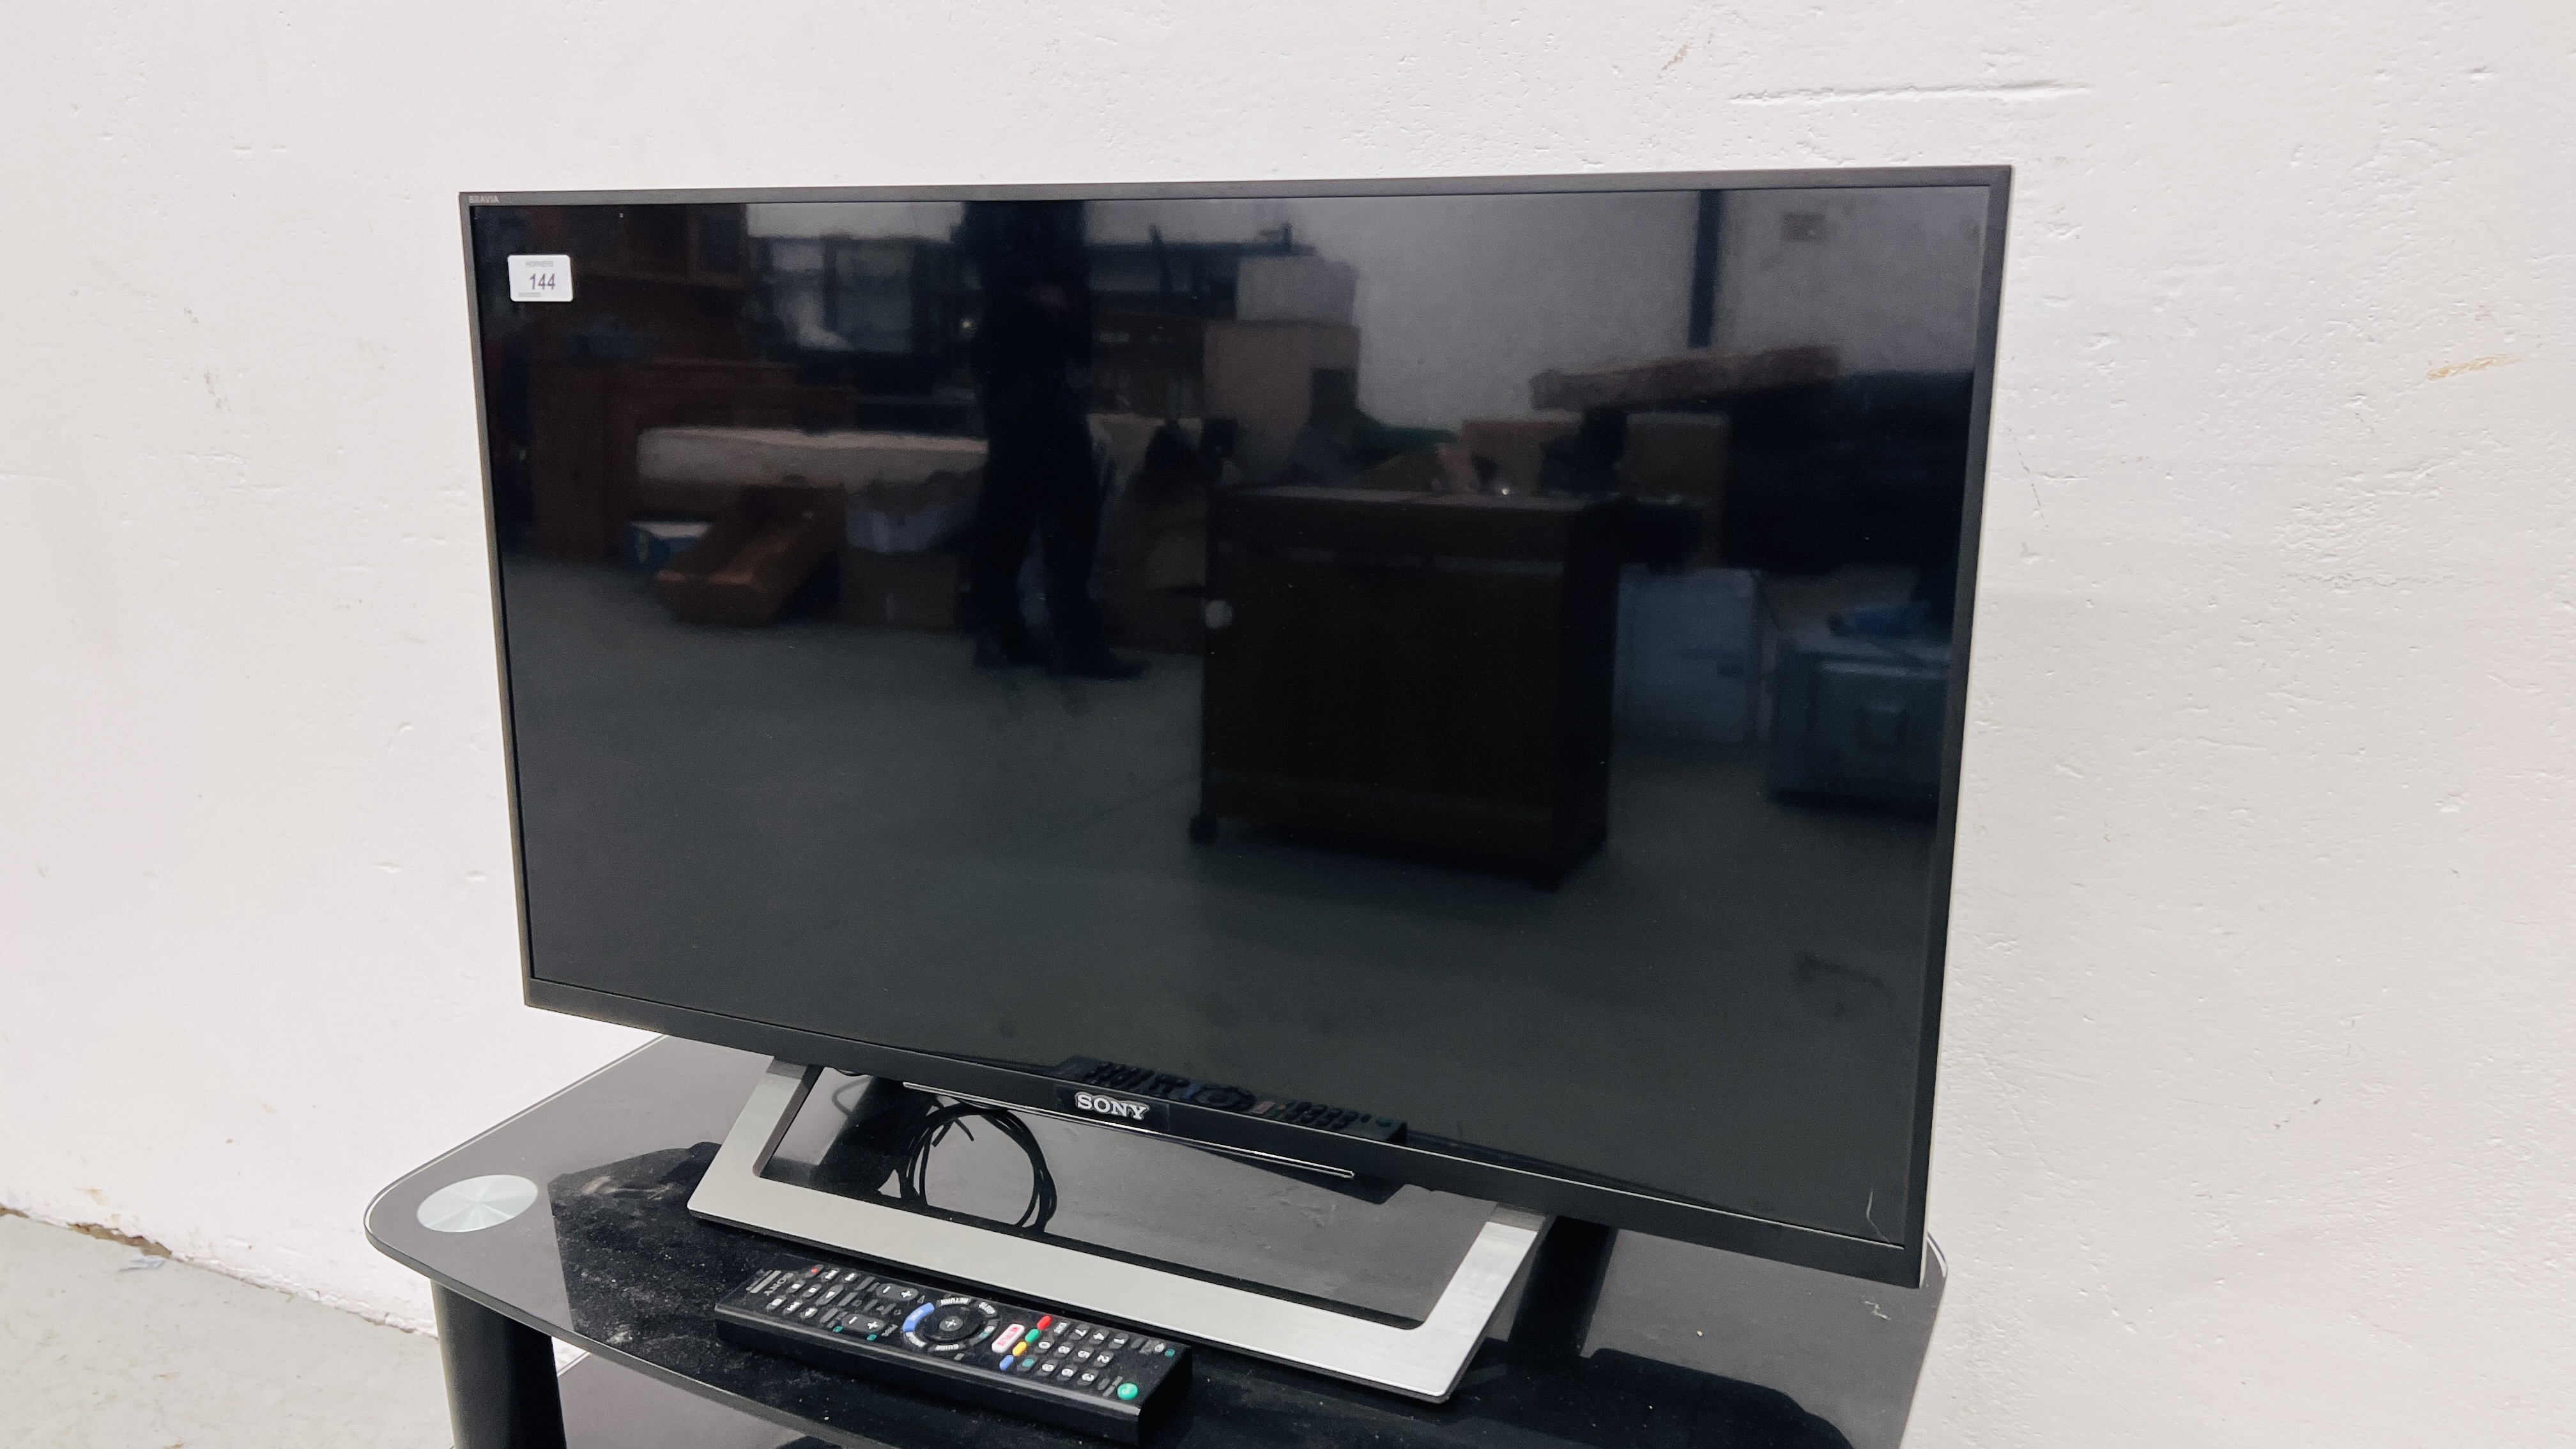 SONY 32 INCH SMART TV COMPLETE WITH REMOTE MODEL KDL32WD756 - SOLD AS SEEN. - Image 2 of 10